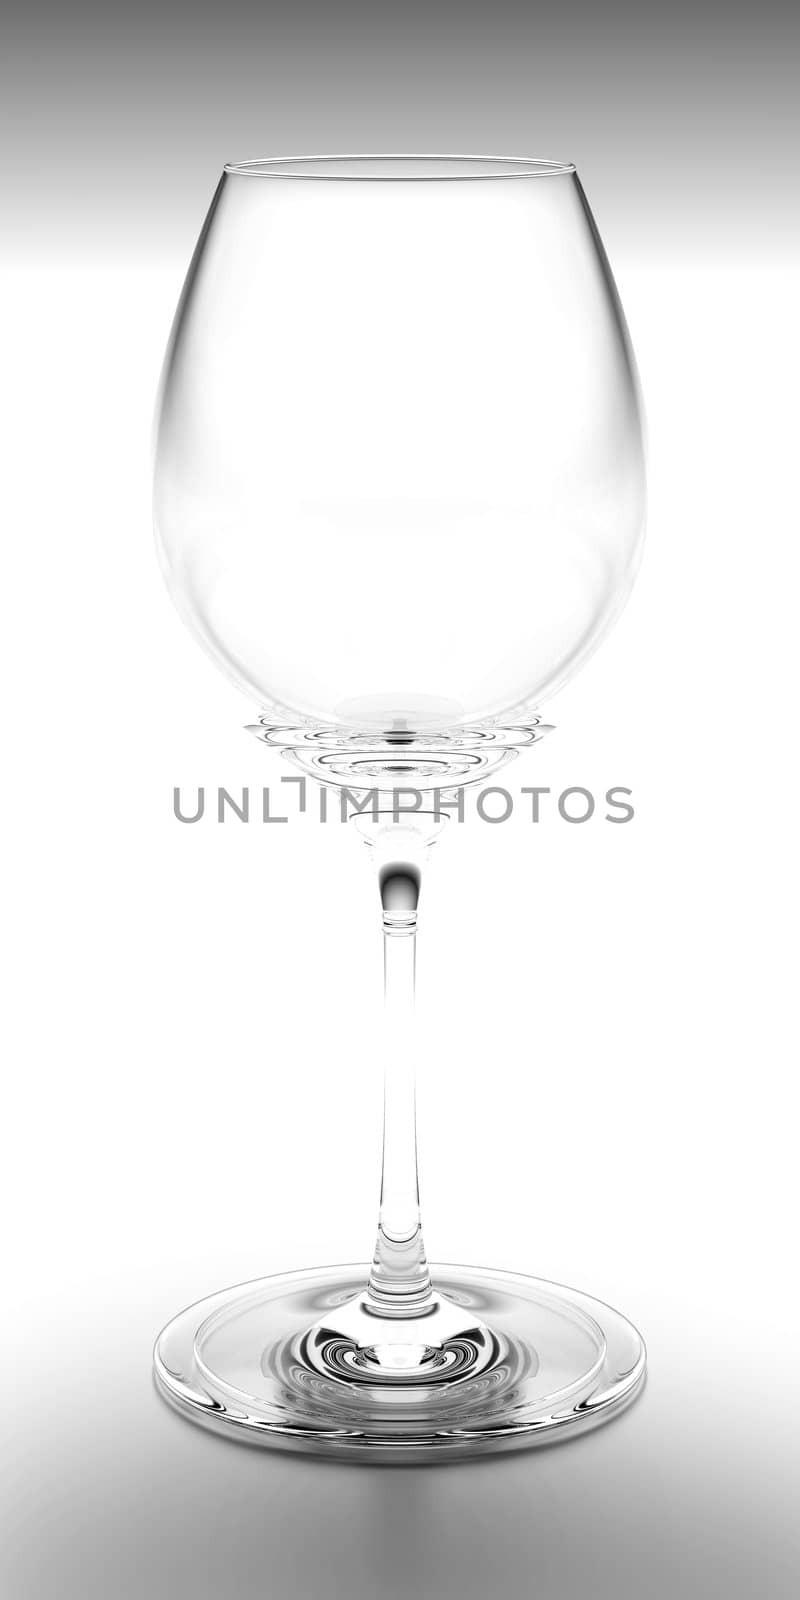 Perfect, clean wine glass